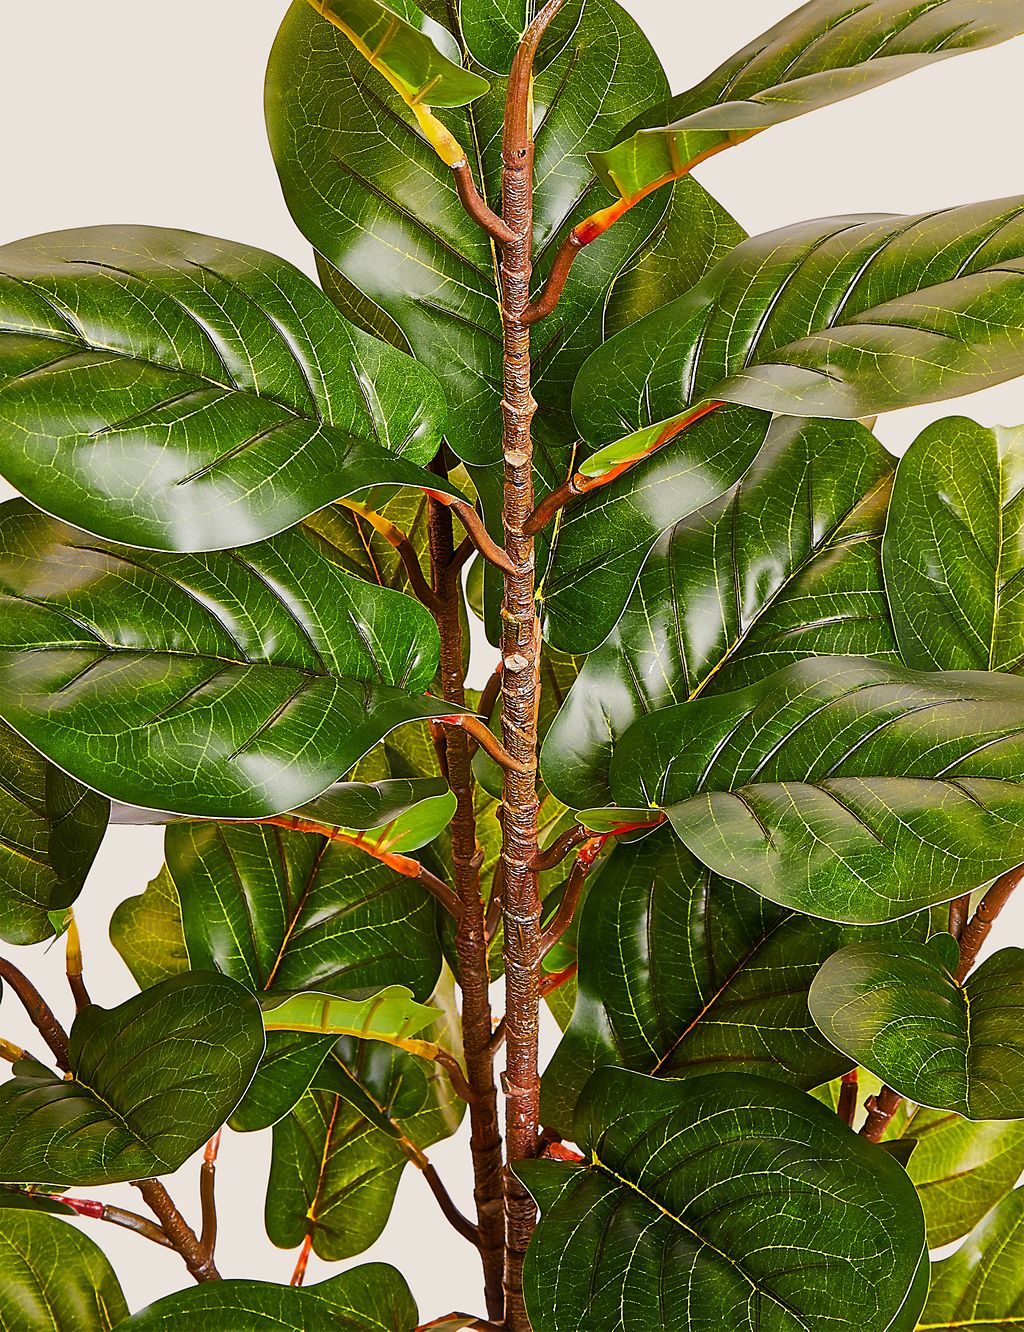 Artificial Floor Standing Fiddle Leaf Fig Tree 2 of 5